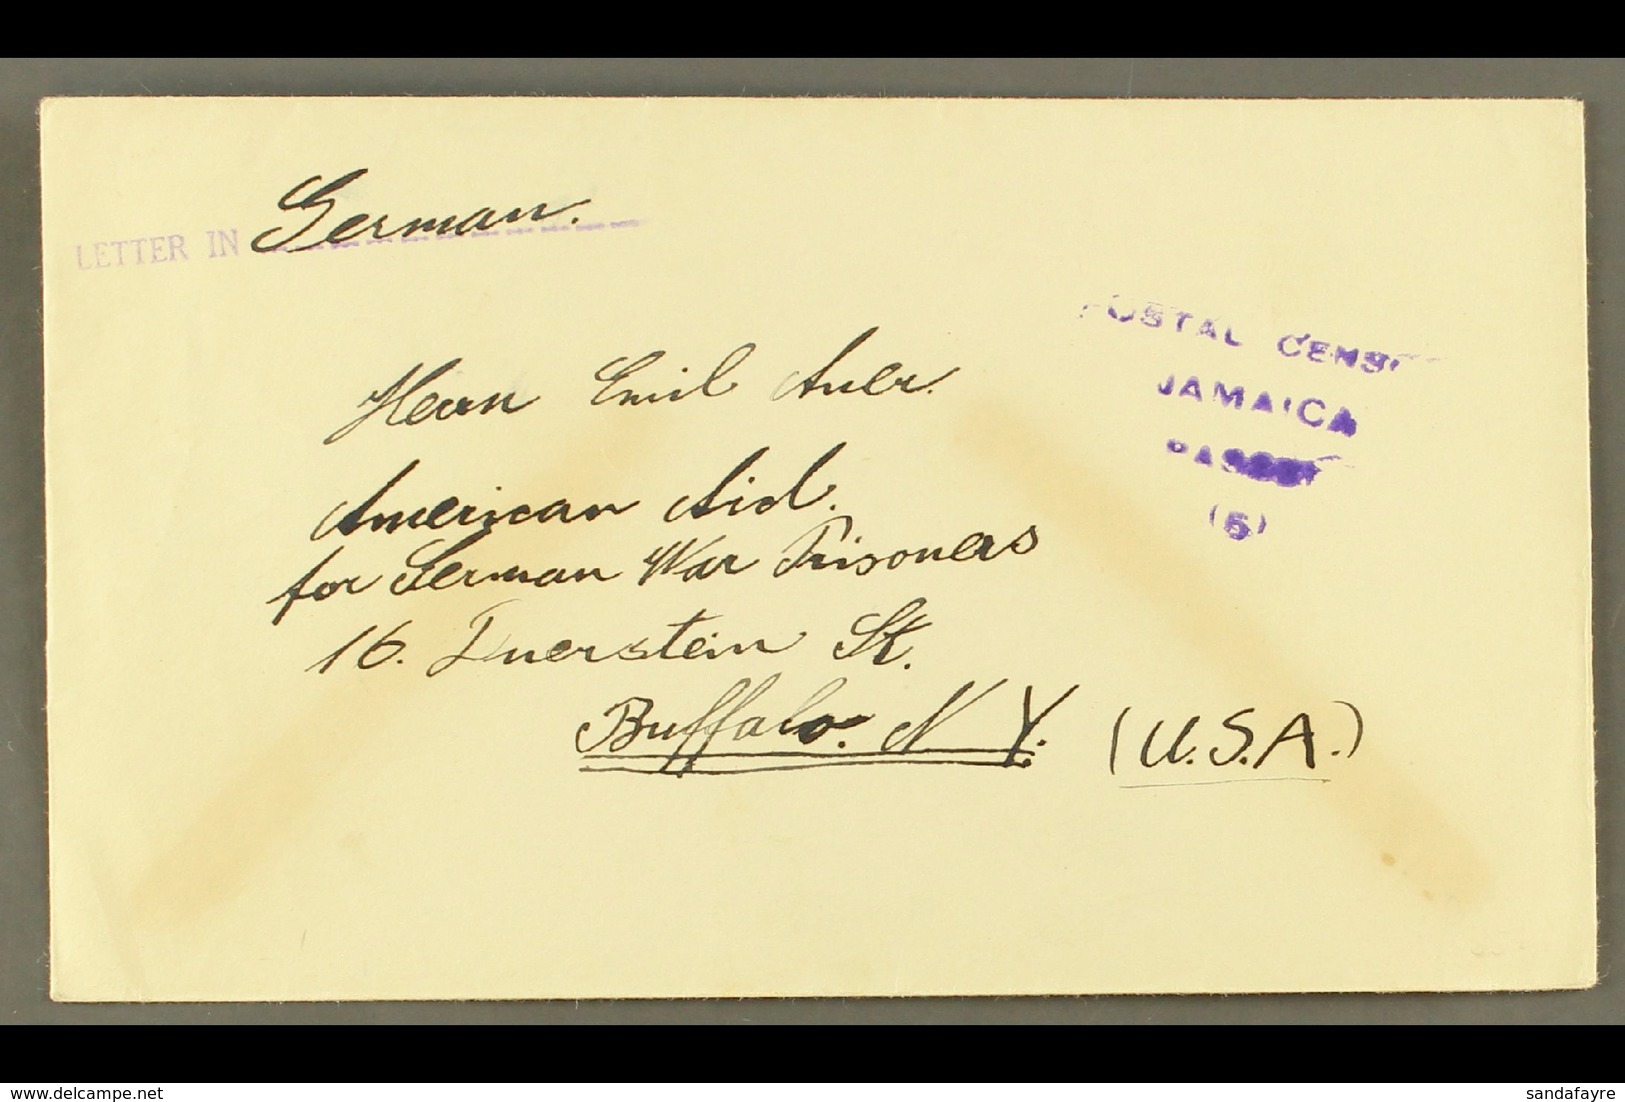 1941 Censored INTERNMENT CAMP Envelope To USA, Endorsed "Letter In German". For More Images, Please Visit Http://www.san - Jamaica (...-1961)